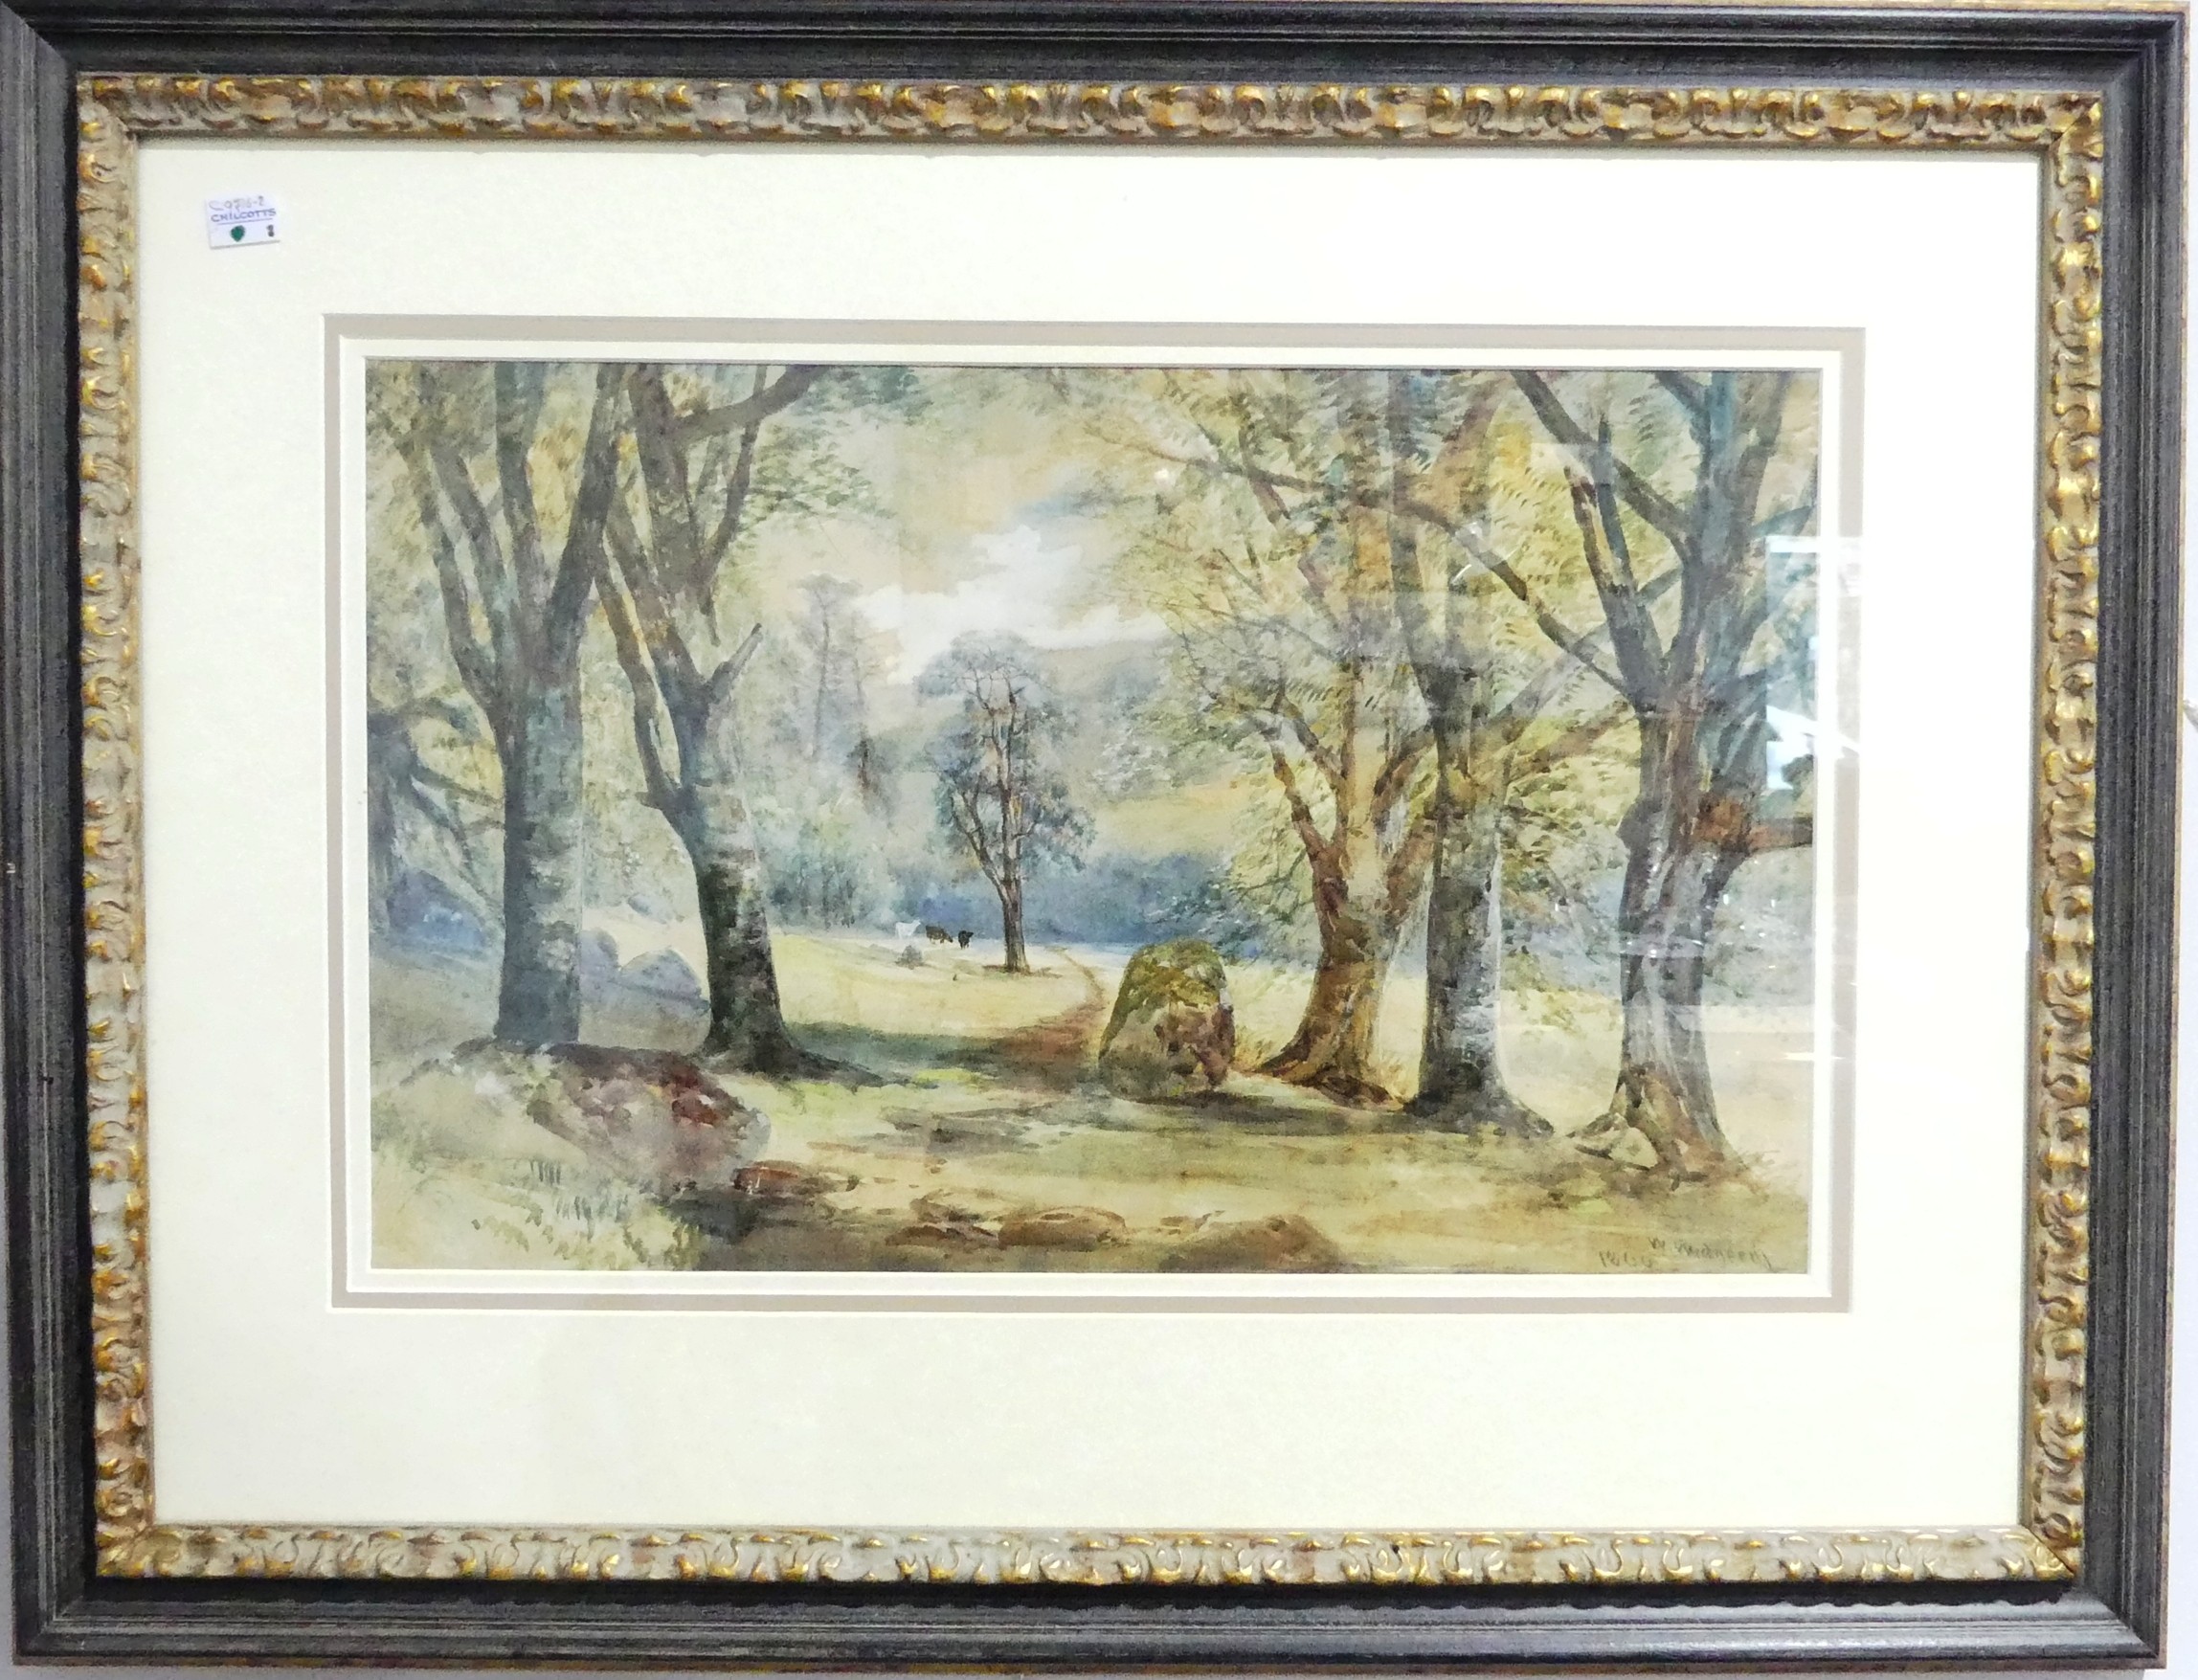 William Widgery (British, 1822-1893): West country landscape, watercolour, signed, dated 1866,